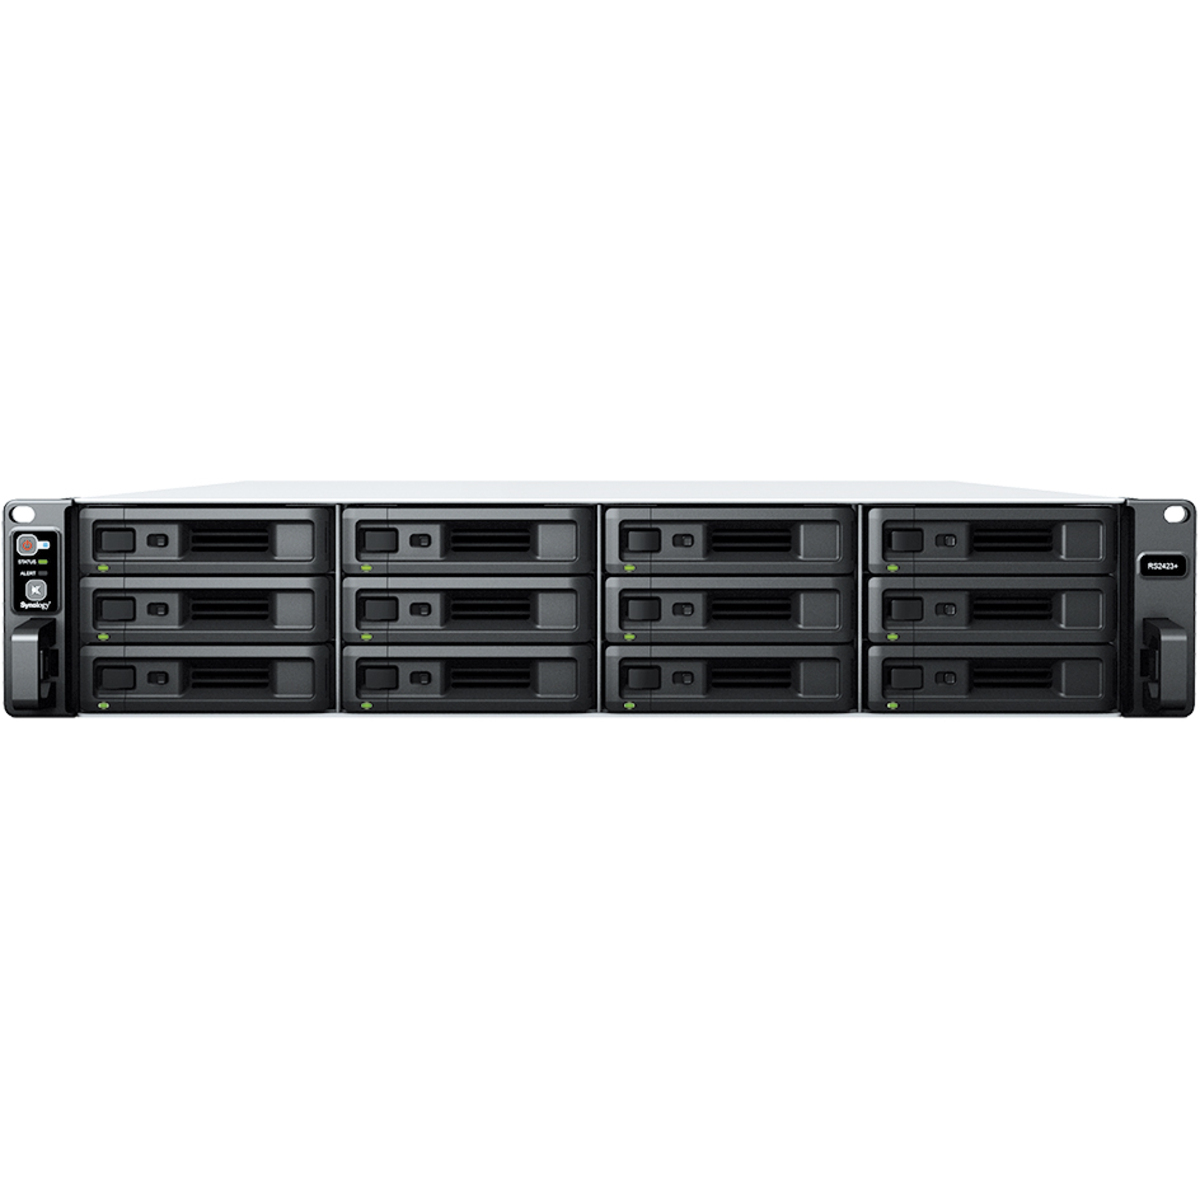 Synology RackStation RS2423+ 48tb 12-Bay RackMount Multimedia / Power User / Business NAS - Network Attached Storage Device 12x4tb Sandisk Ultra 3D SDSSDH3-4T00 2.5 560/520MB/s SATA 6Gb/s SSD CONSUMER Class Drives Installed - Burn-In Tested RackStation RS2423+